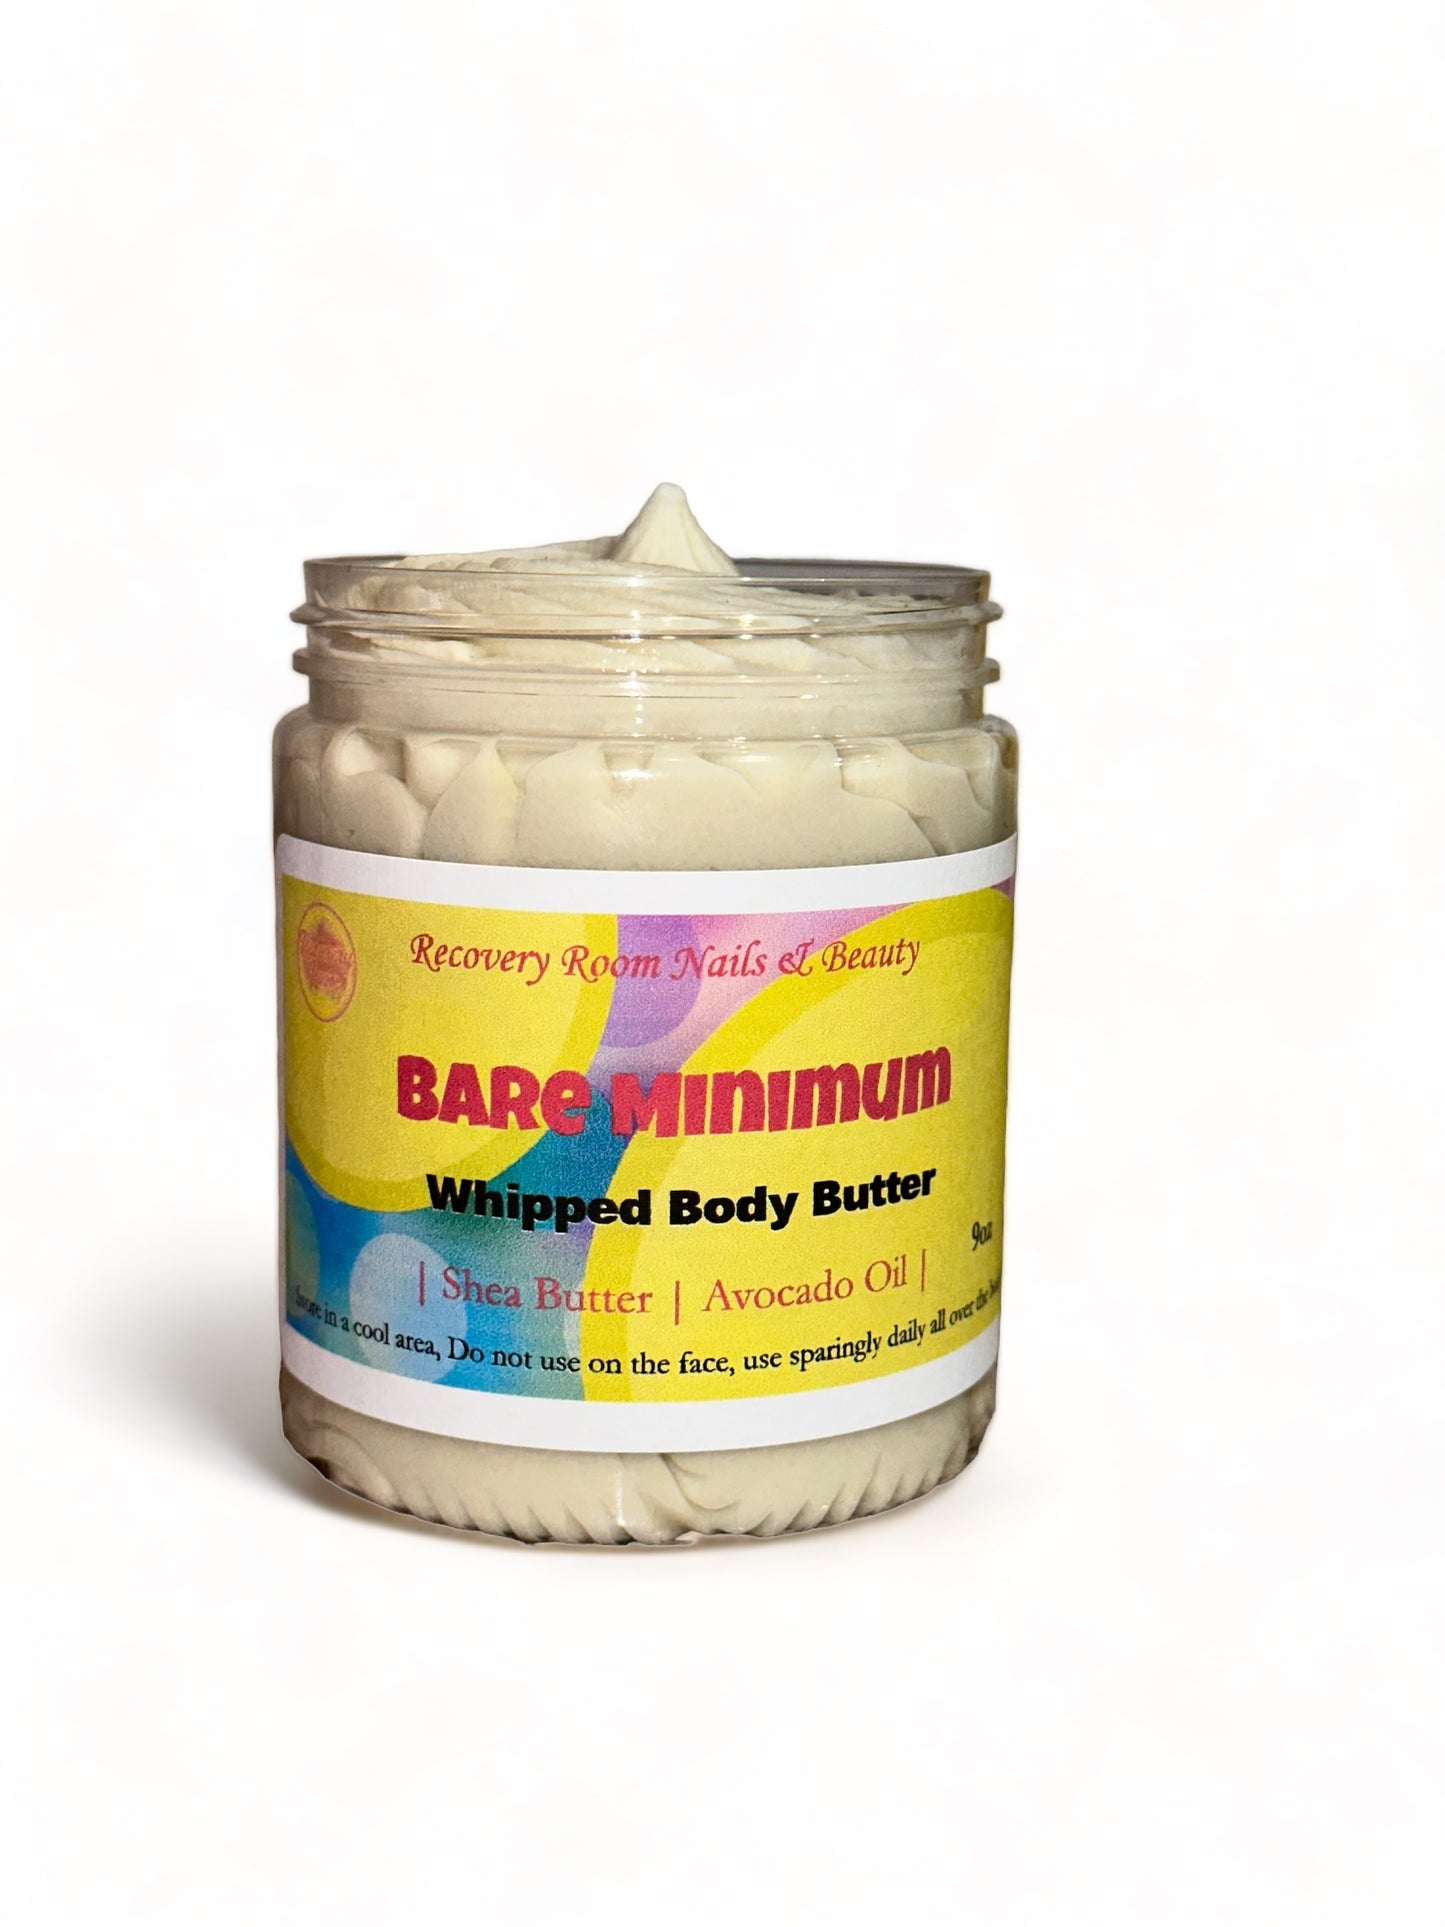 Bare Minimum Whipped Body Butter